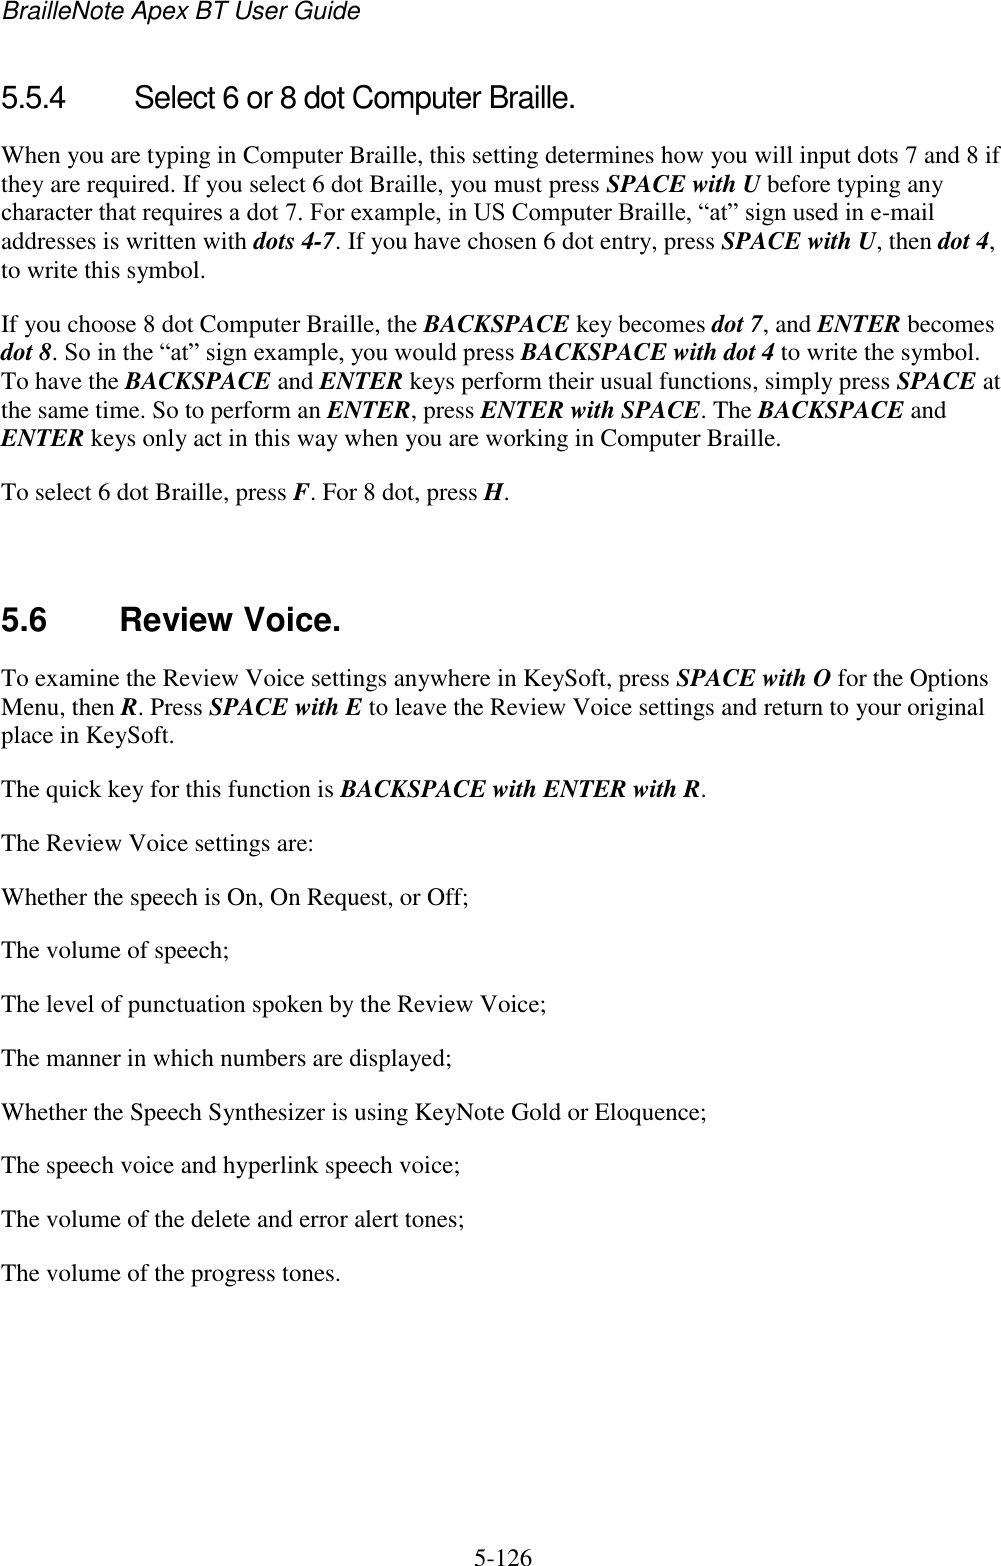 BrailleNote Apex BT User Guide   5-126   5.5.4  Select 6 or 8 dot Computer Braille. When you are typing in Computer Braille, this setting determines how you will input dots 7 and 8 if they are required. If you select 6 dot Braille, you must press SPACE with U before typing any character that requires a dot 7. For example, in US Computer Braille, “at” sign used in e-mail addresses is written with dots 4-7. If you have chosen 6 dot entry, press SPACE with U, then dot 4, to write this symbol. If you choose 8 dot Computer Braille, the BACKSPACE key becomes dot 7, and ENTER becomes dot 8. So in the “at” sign example, you would press BACKSPACE with dot 4 to write the symbol. To have the BACKSPACE and ENTER keys perform their usual functions, simply press SPACE at the same time. So to perform an ENTER, press ENTER with SPACE. The BACKSPACE and ENTER keys only act in this way when you are working in Computer Braille. To select 6 dot Braille, press F. For 8 dot, press H.   5.6  Review Voice. To examine the Review Voice settings anywhere in KeySoft, press SPACE with O for the Options Menu, then R. Press SPACE with E to leave the Review Voice settings and return to your original place in KeySoft. The quick key for this function is BACKSPACE with ENTER with R. The Review Voice settings are: Whether the speech is On, On Request, or Off; The volume of speech; The level of punctuation spoken by the Review Voice; The manner in which numbers are displayed; Whether the Speech Synthesizer is using KeyNote Gold or Eloquence; The speech voice and hyperlink speech voice; The volume of the delete and error alert tones; The volume of the progress tones.   